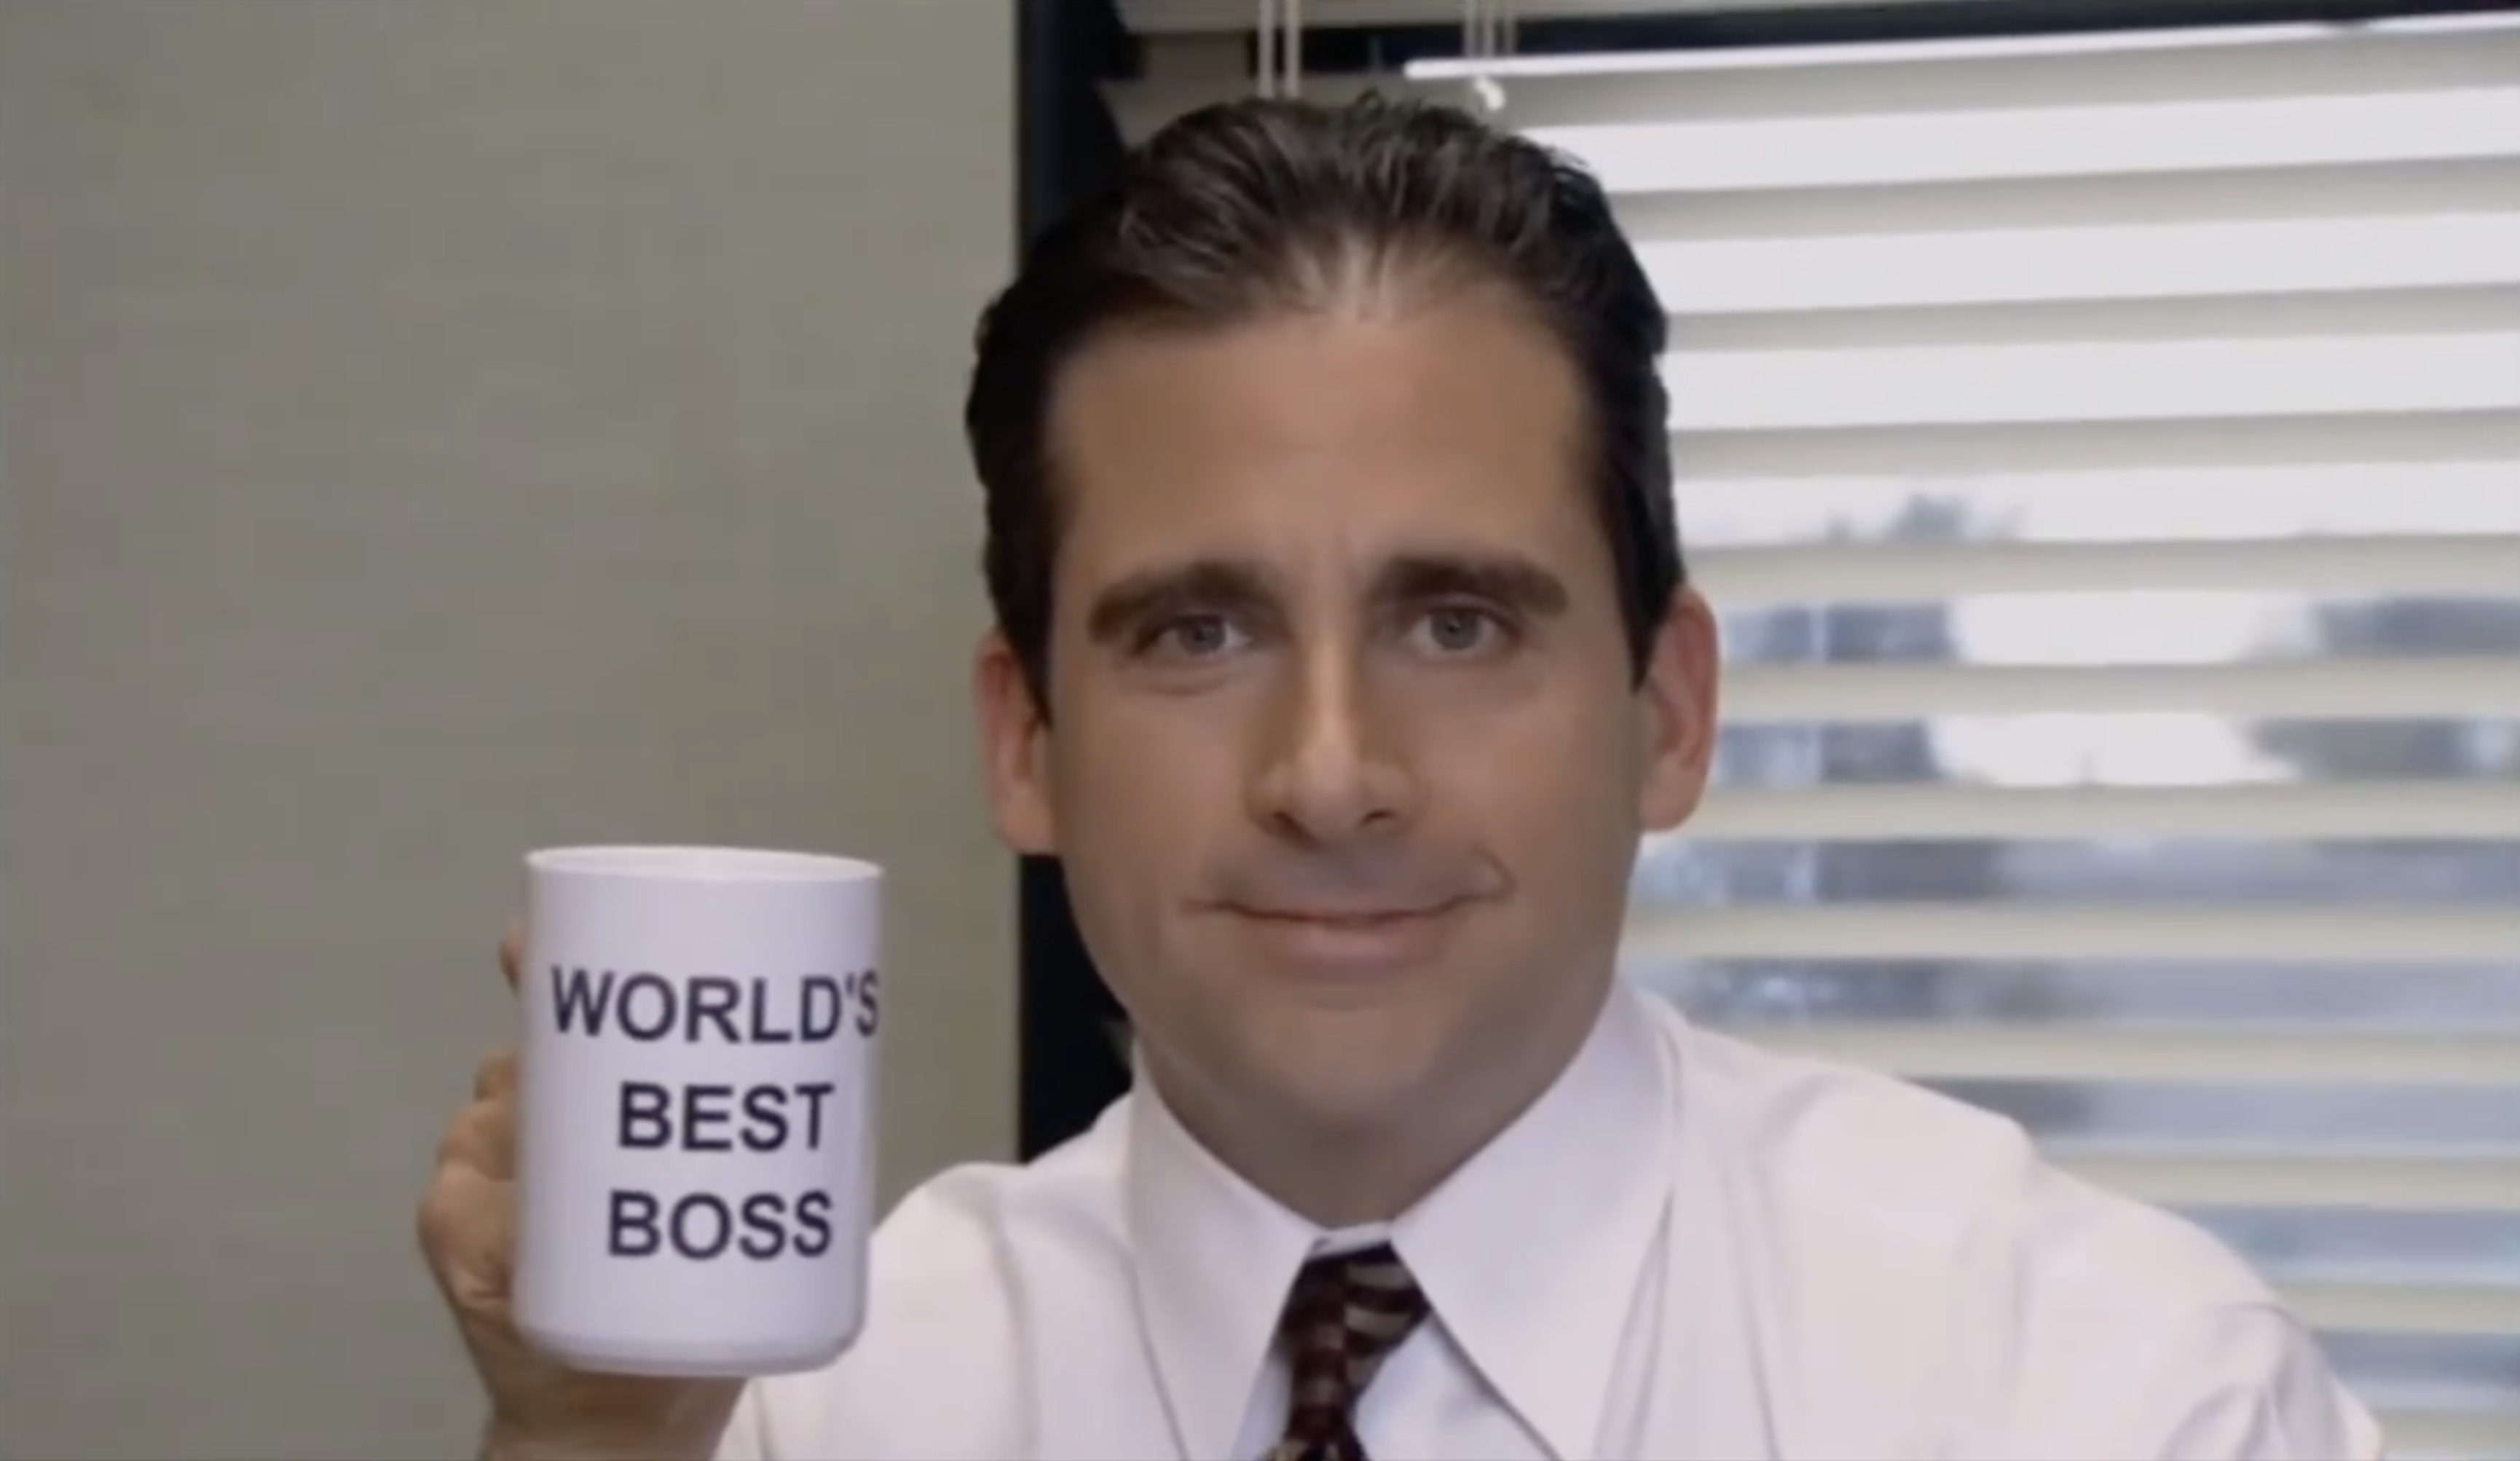 steve carell as michael scott in &quot;the office&quot;